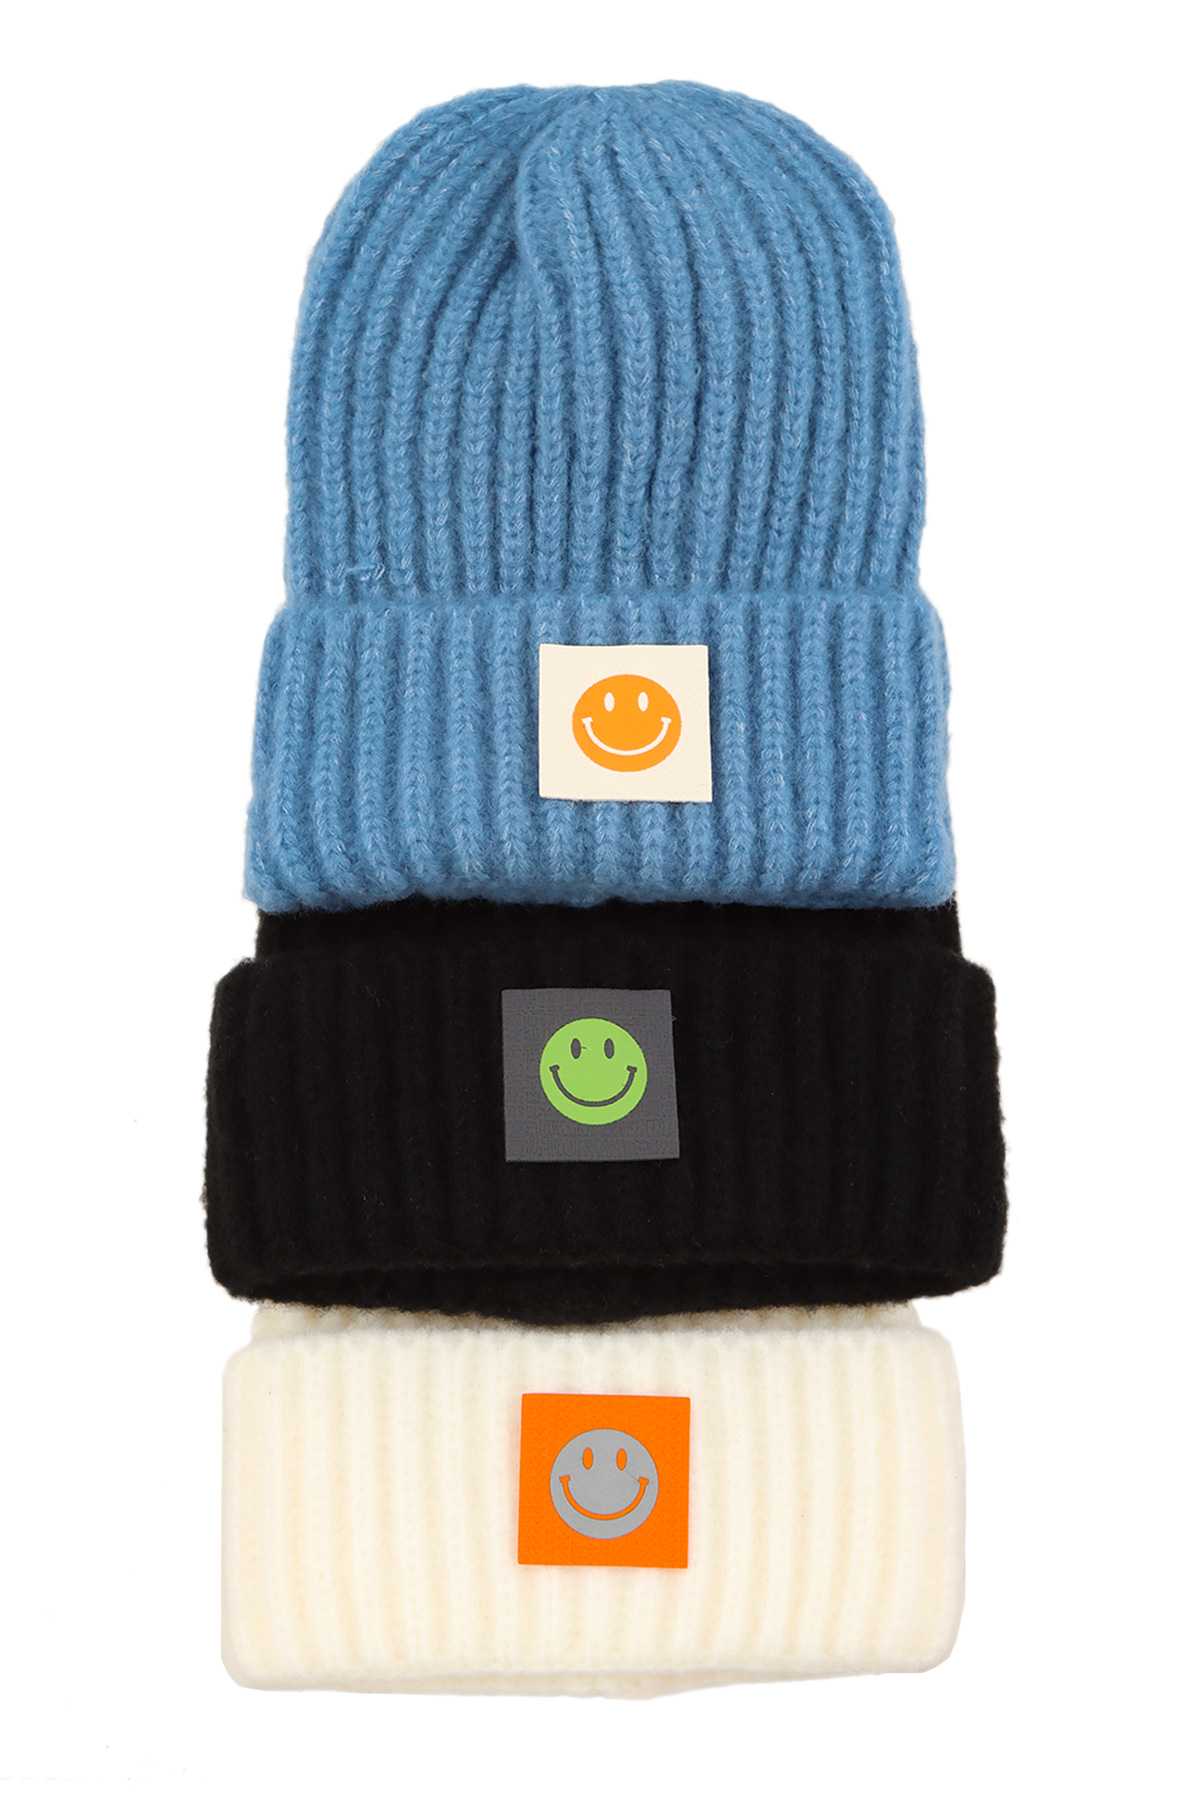 Solid Rib Beanie with Smile Accent